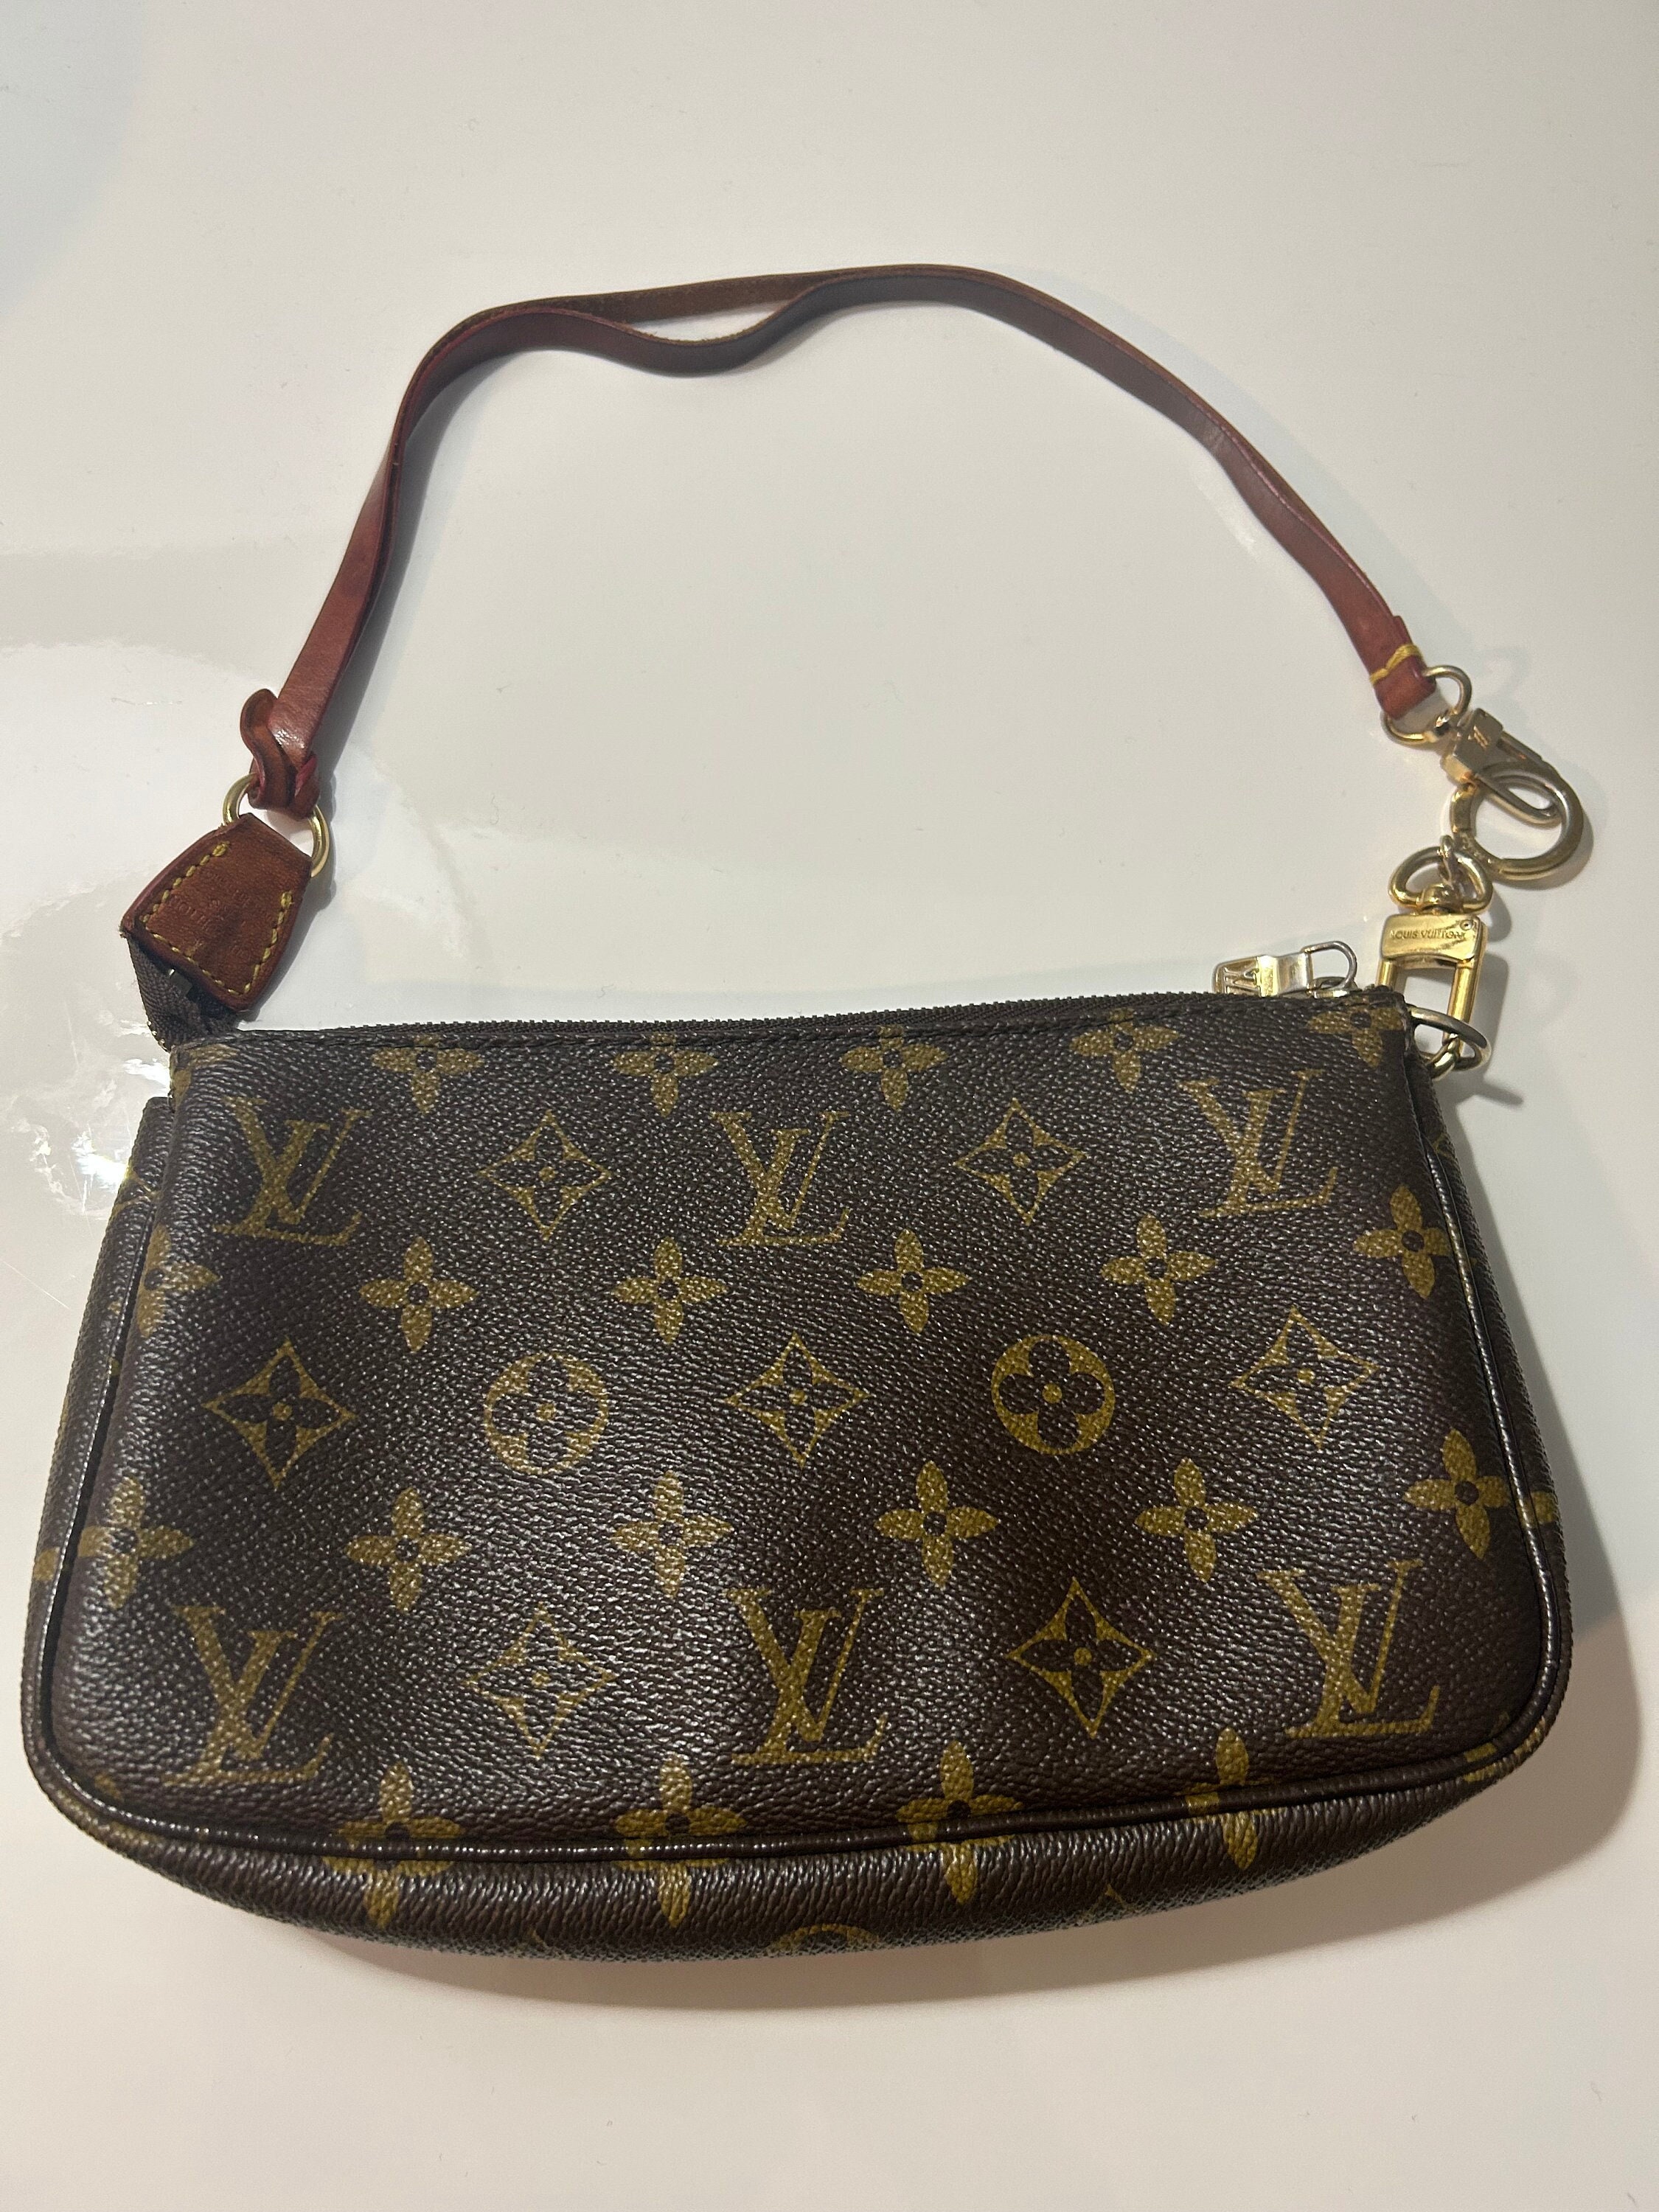 Replacement Louis Vuitton Zipper Pull - Used